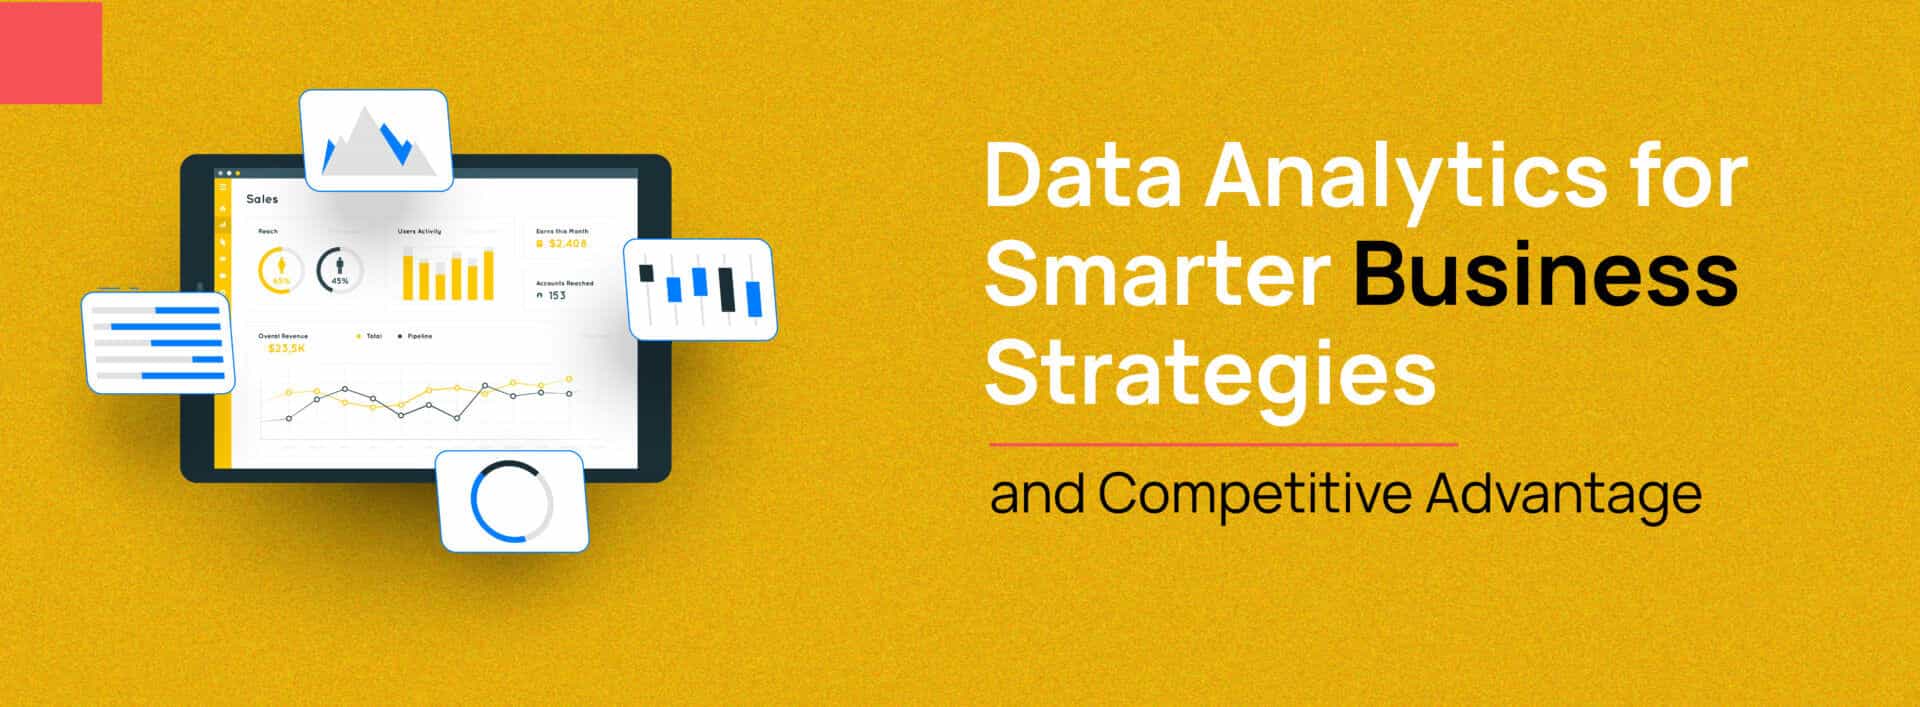 Data Analytics for Smarter Business Strategies and Competitive Advantage